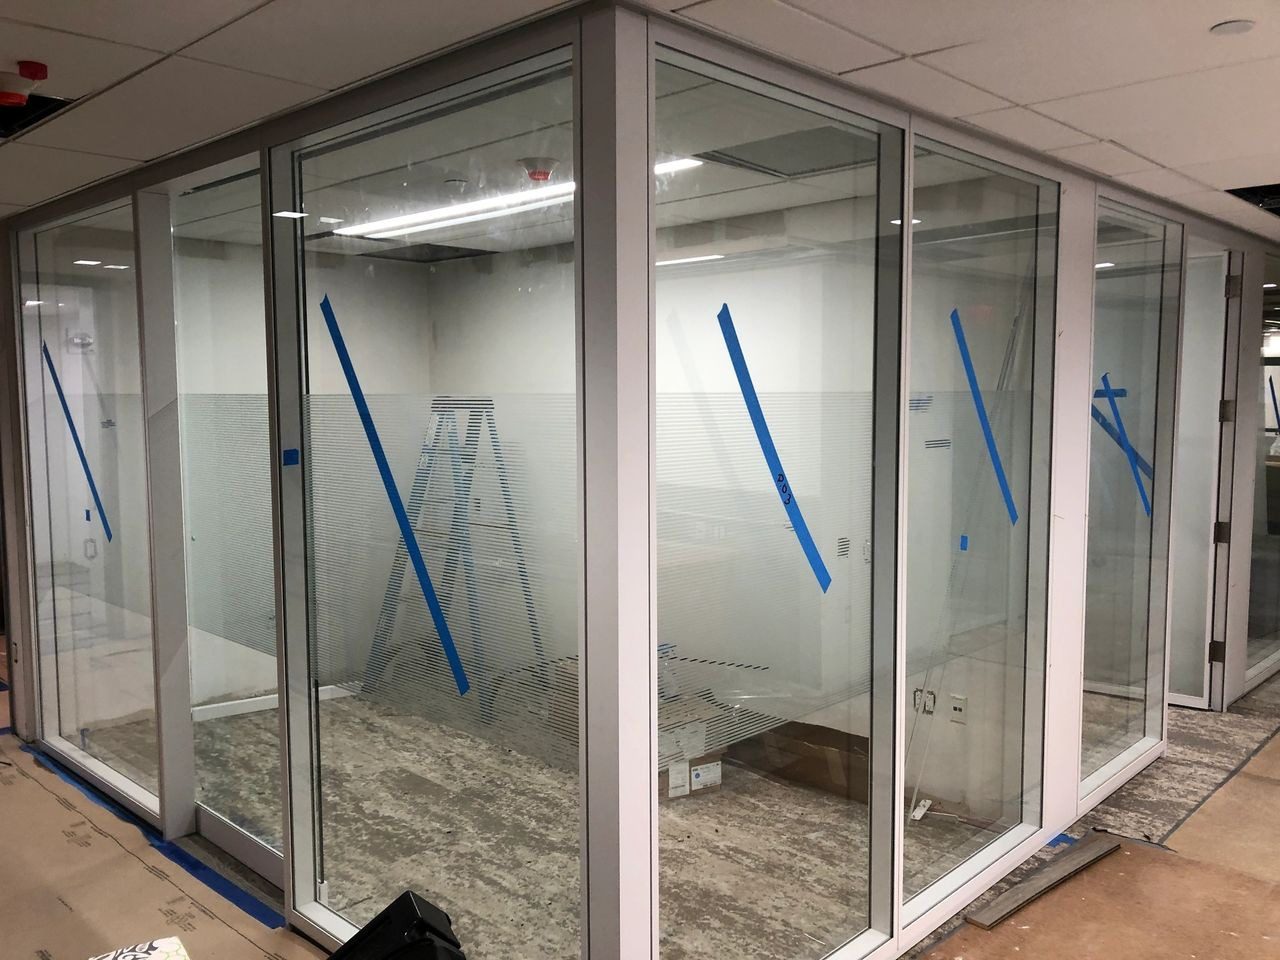 A room with glass walls and blue tape on the floor.